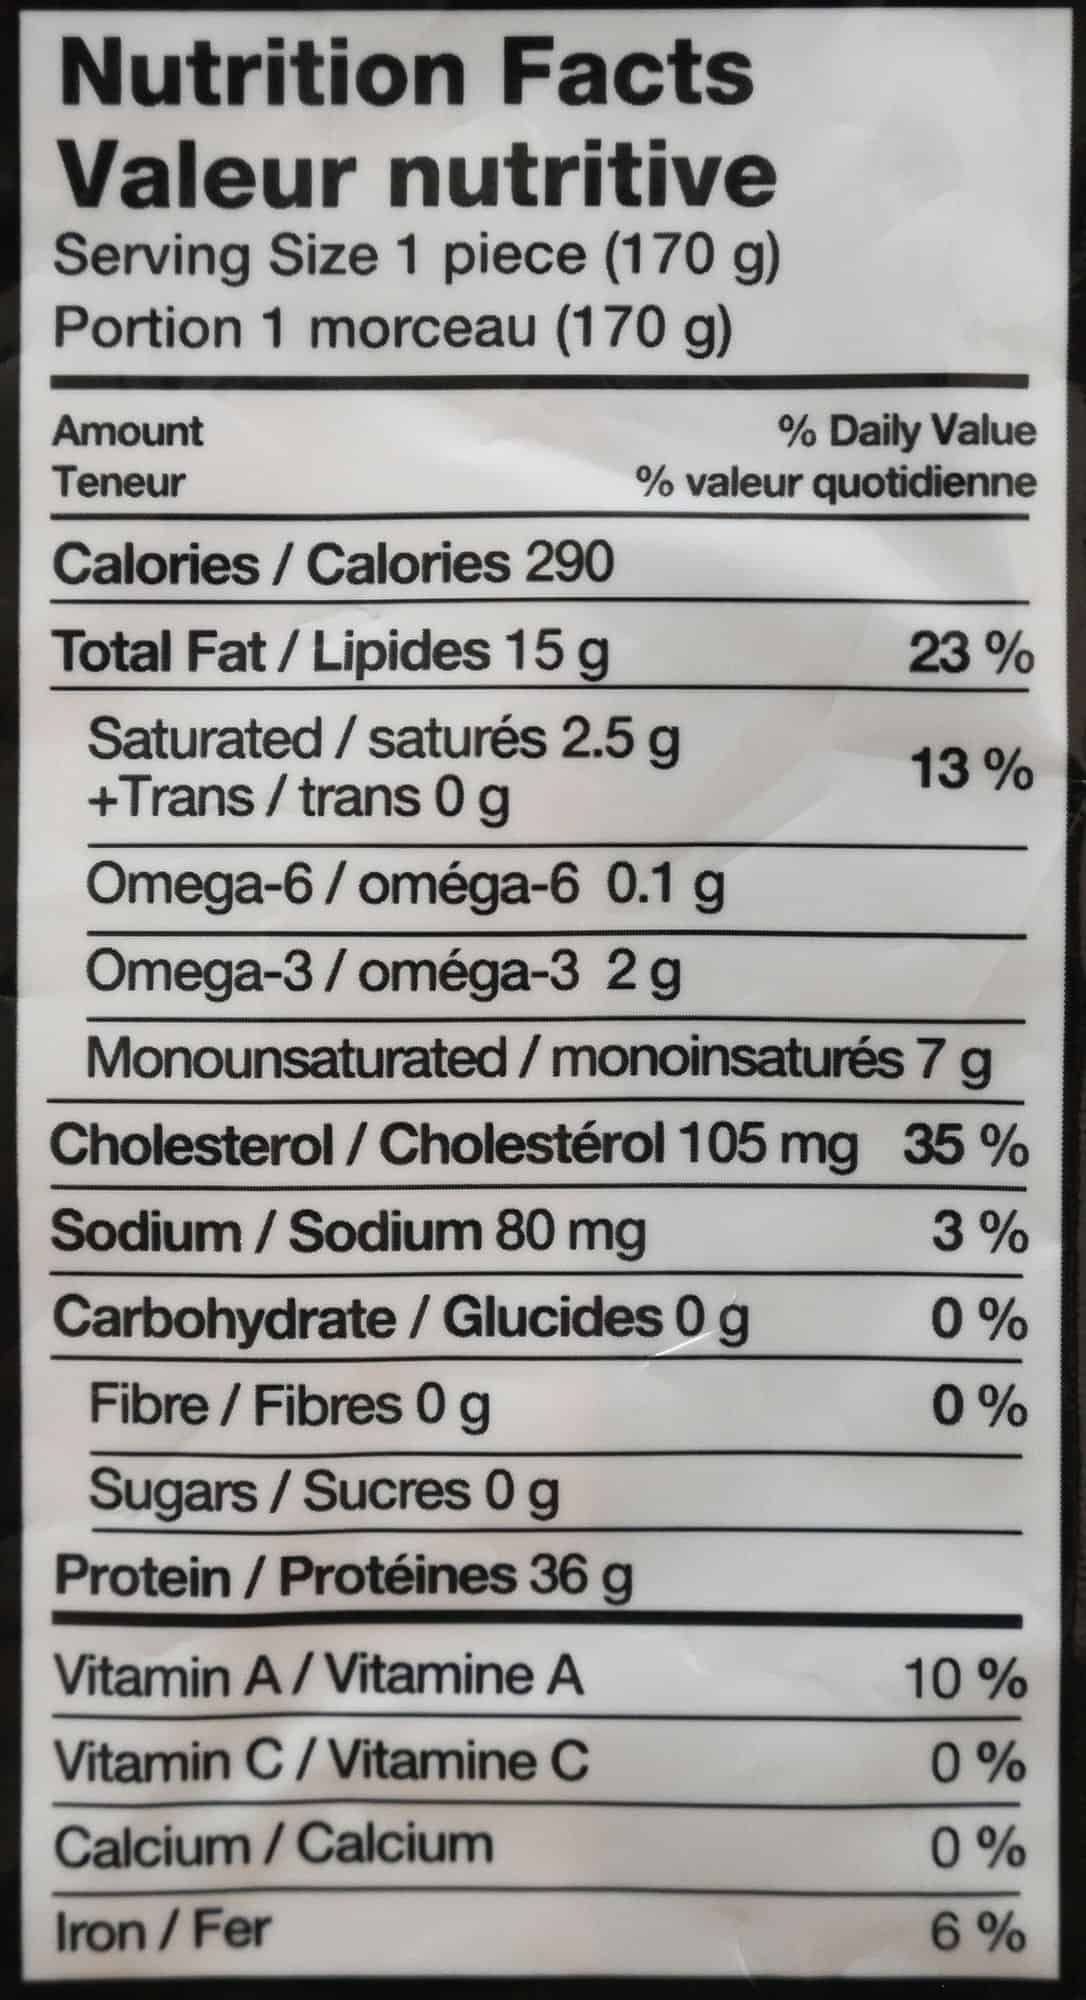 Salmon nutrition facts from the bag for one portion.